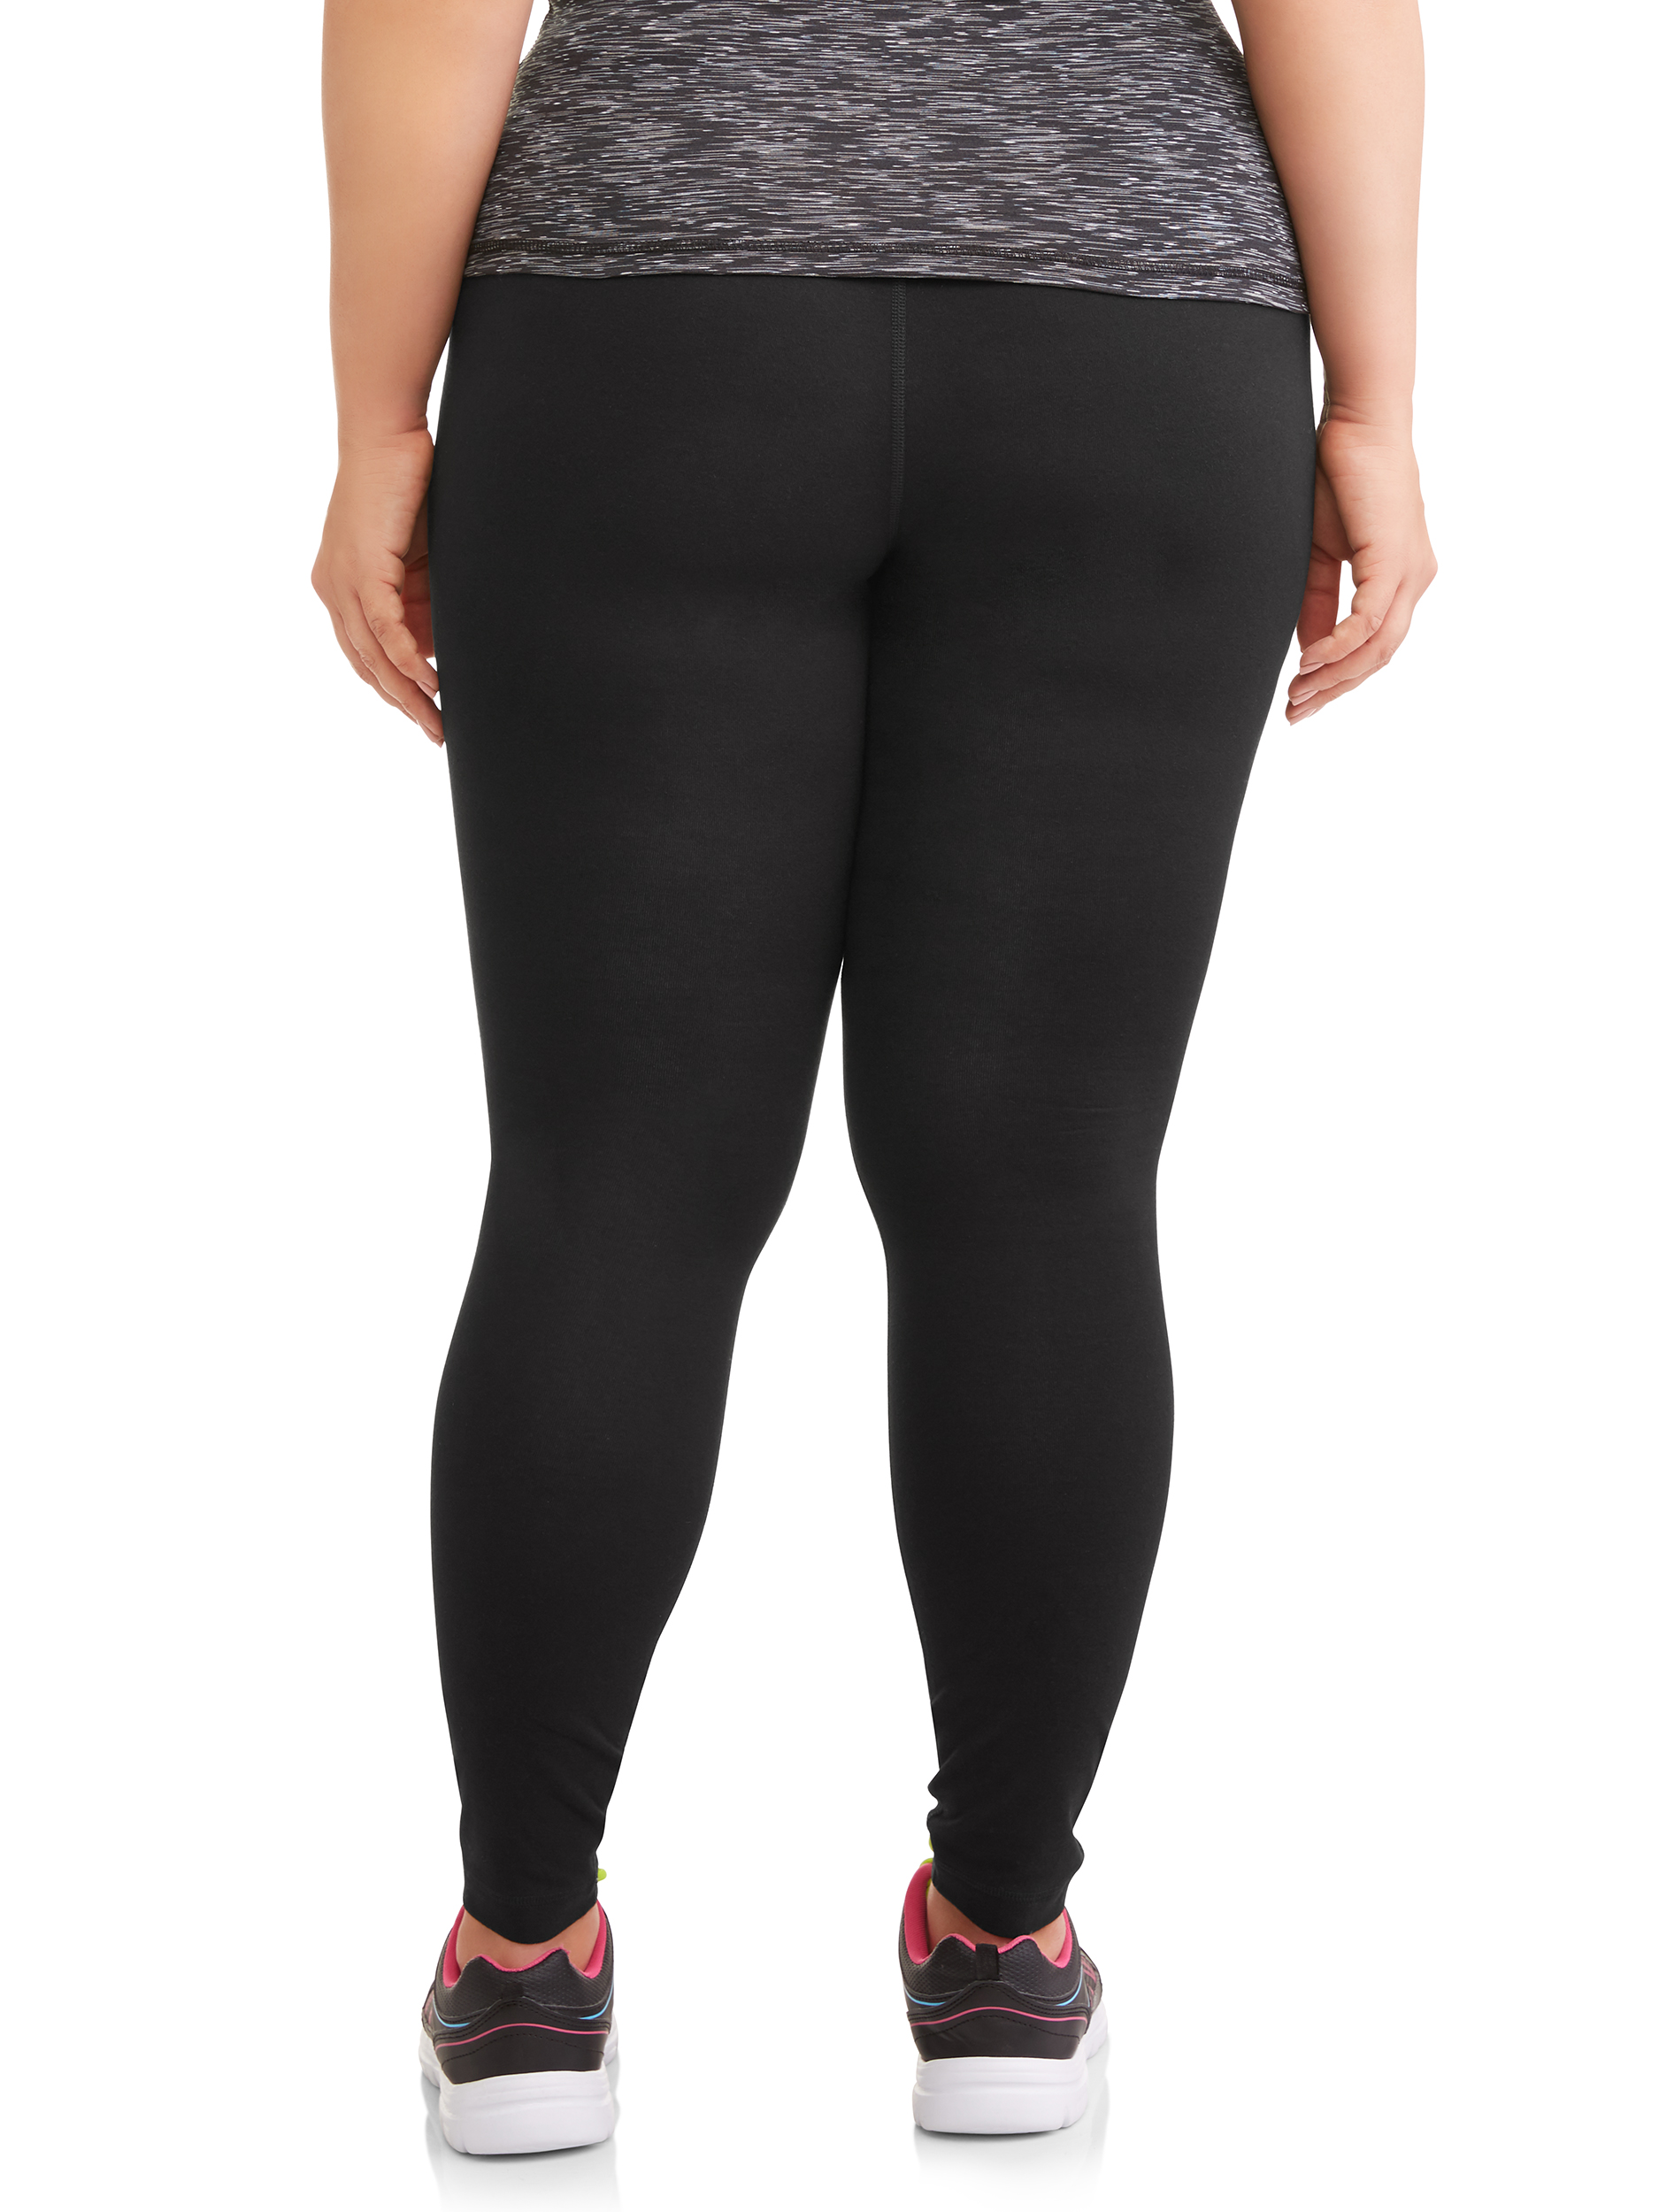 Athletic Works Women's and Women's Plus Stretch Cotton Blend Ankle Leggings with Side Pockets - image 4 of 4